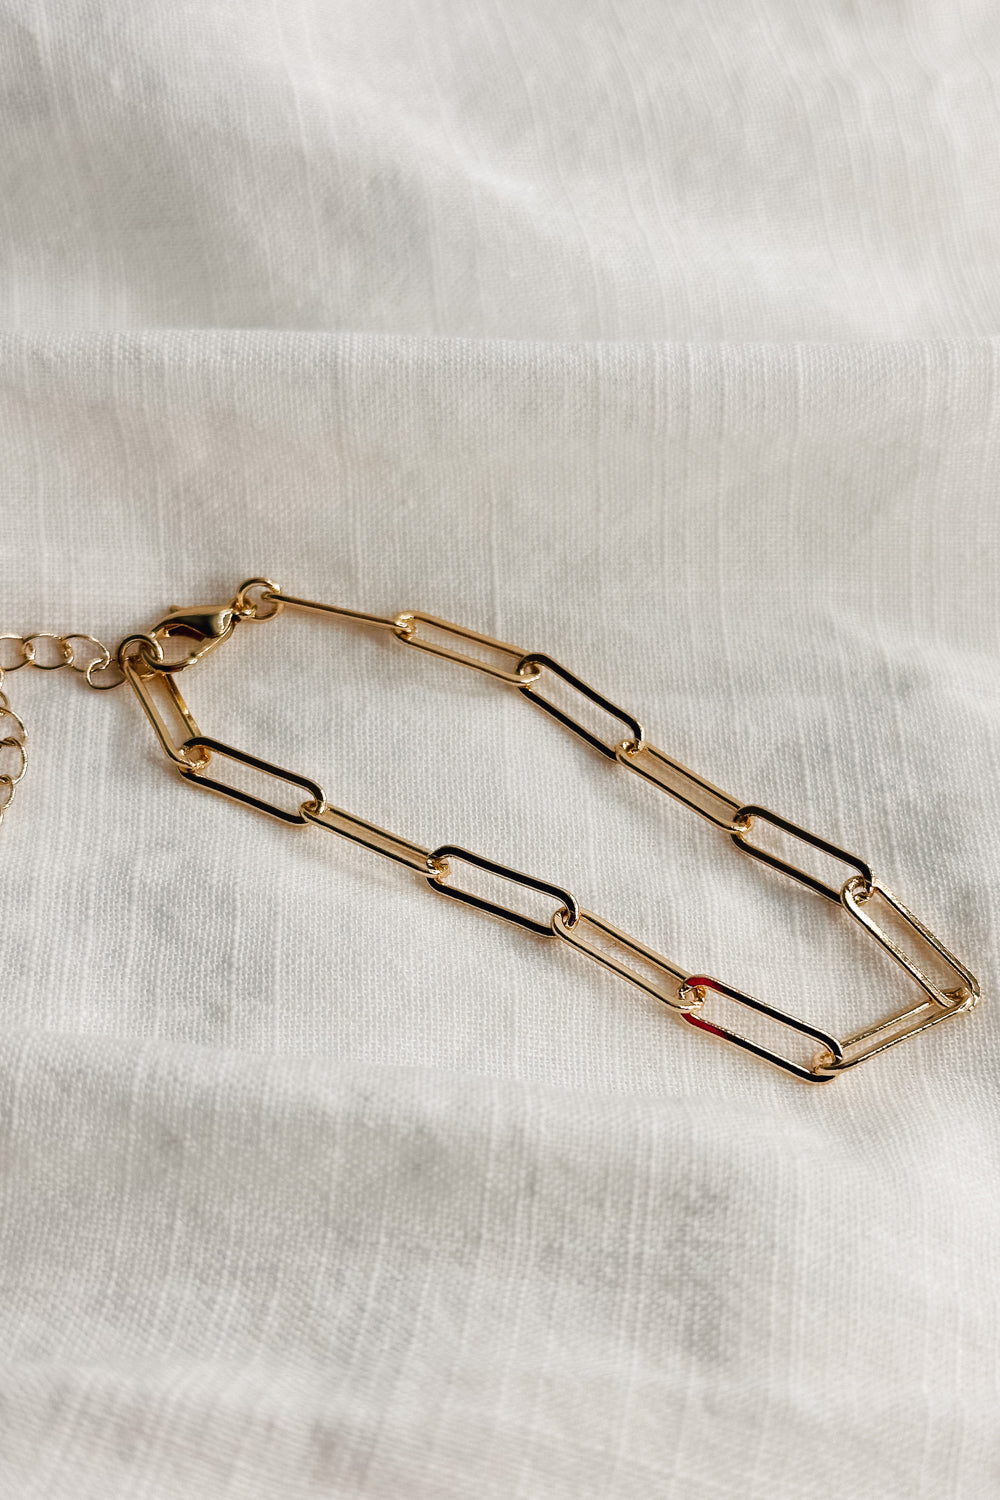 Image shows Leanne Gold Oval Chain Link Bracelet against a white background. Bracelet has gold oval links.